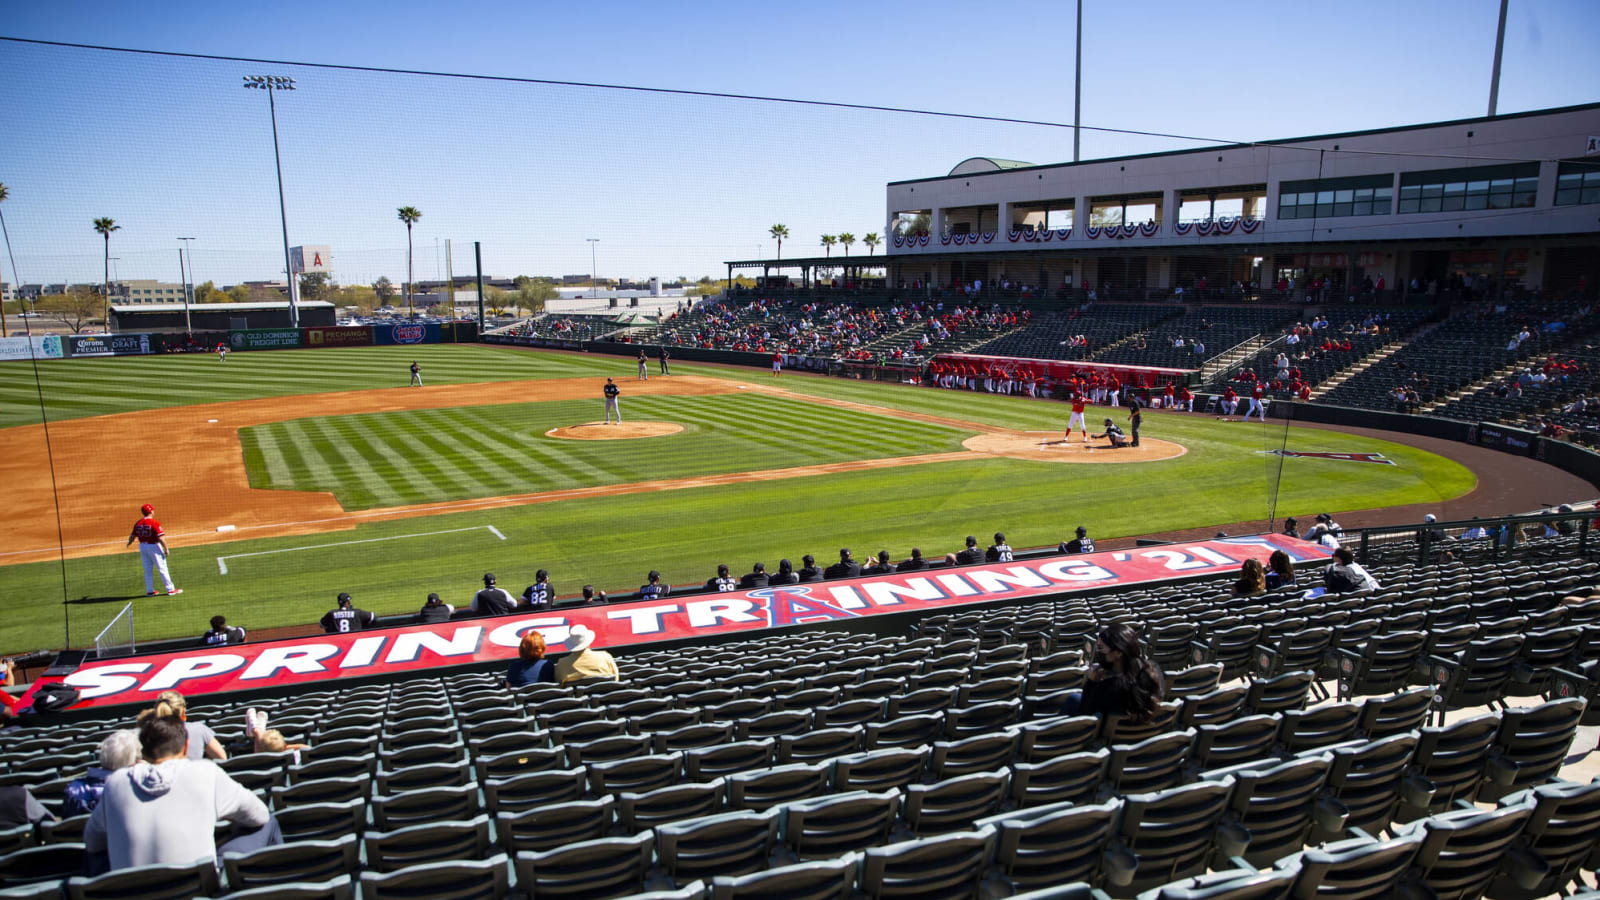 Spring training likely delayed after latest lockout meeting